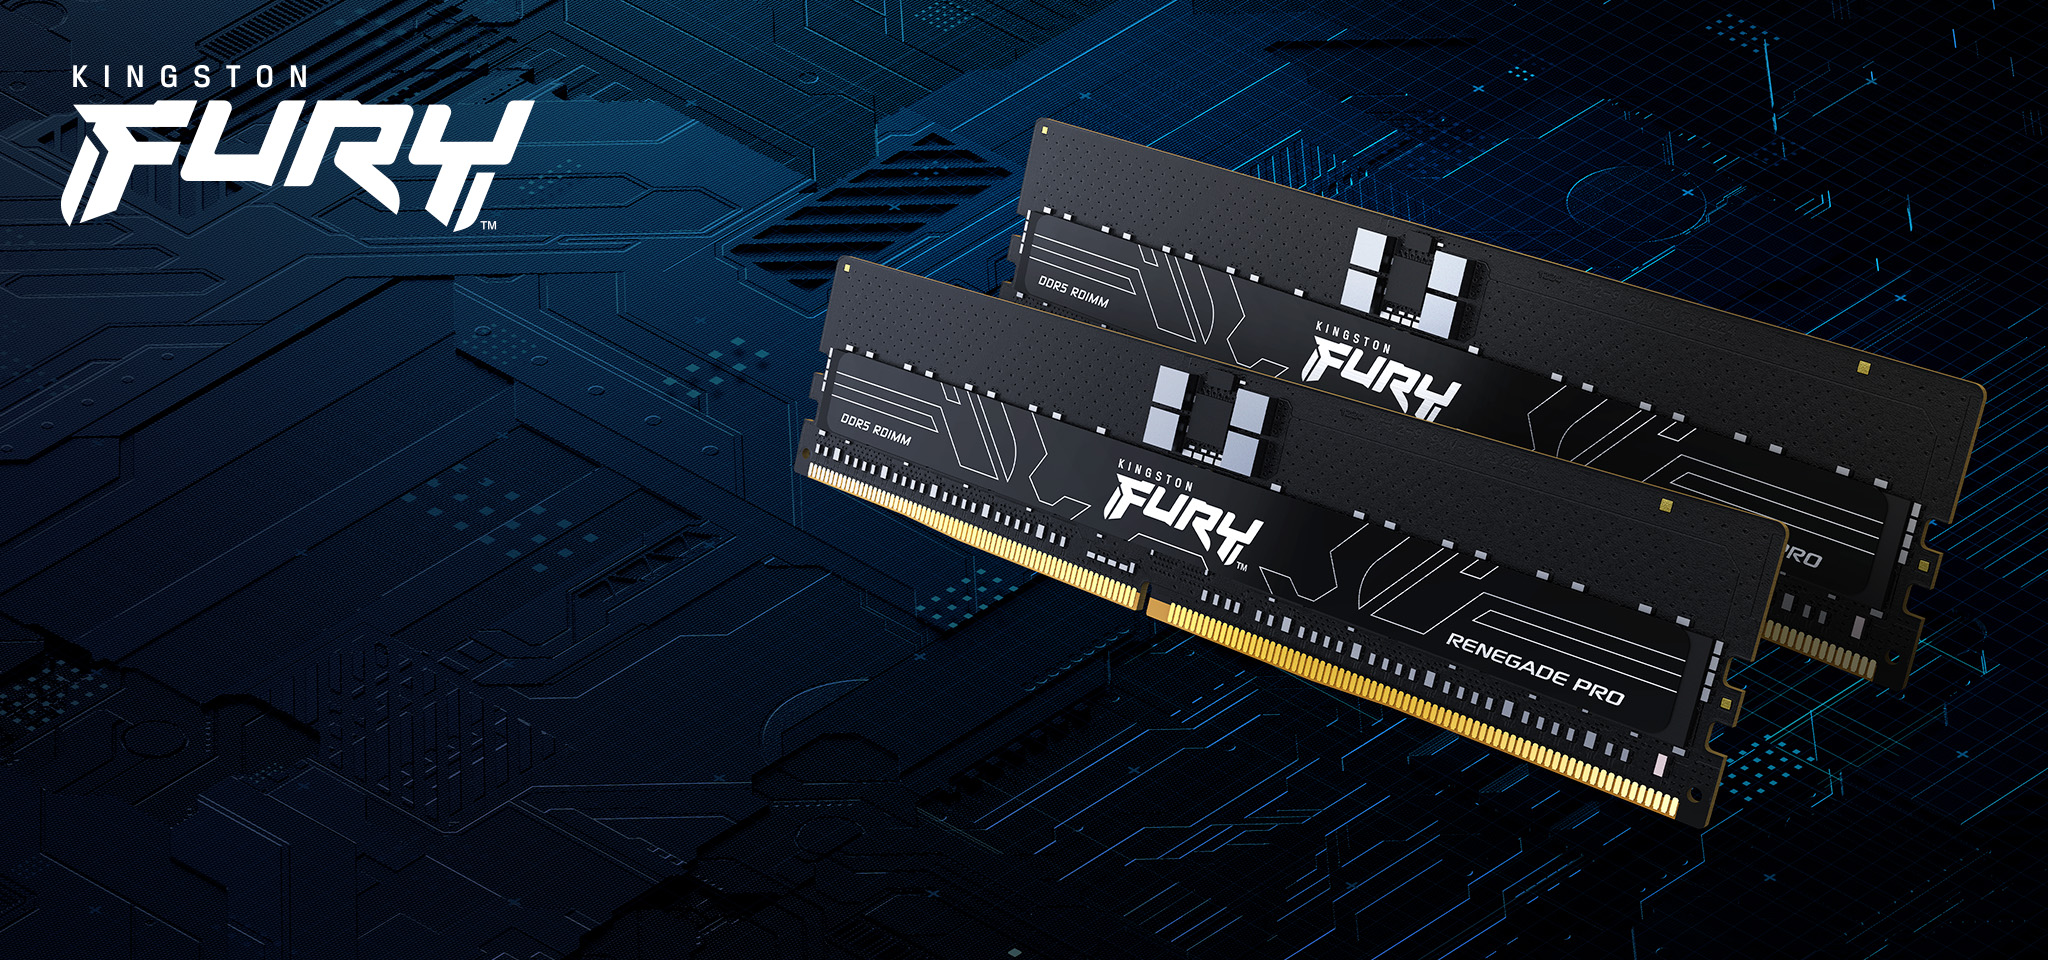 Two Kingston FURY Renegade Pro DDR5 RDIMM memory modules sit against a black BCB graphic.